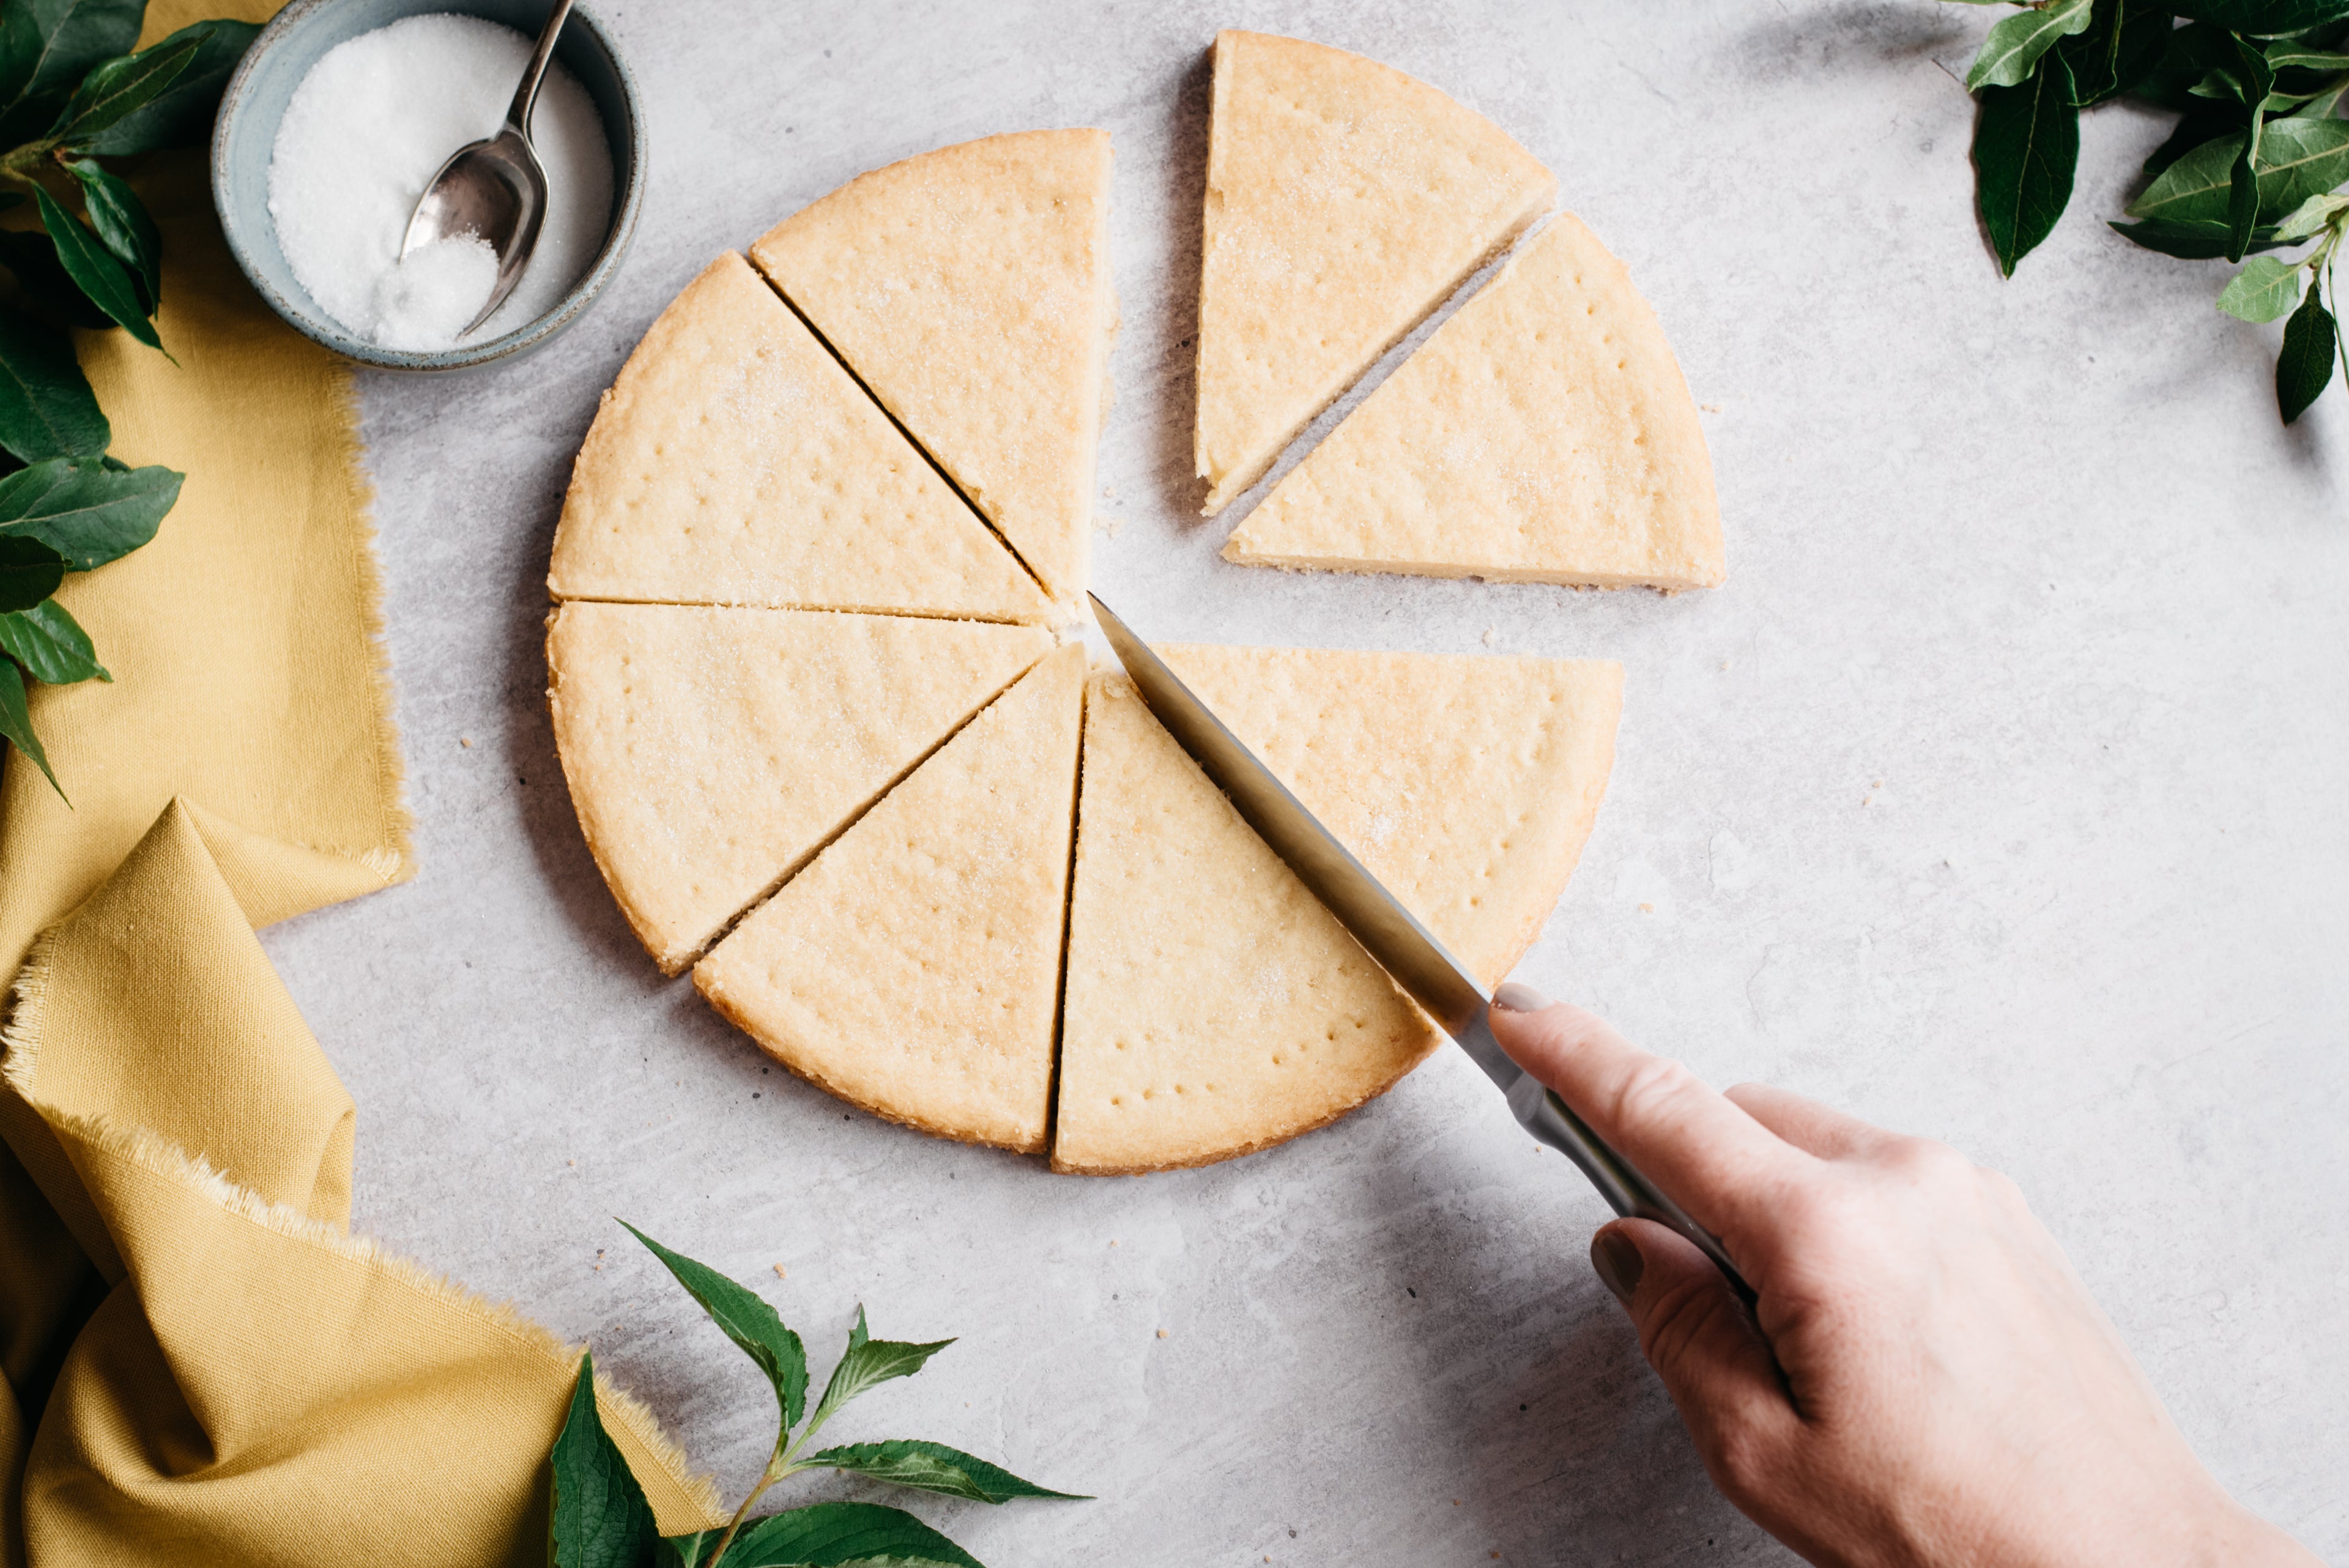 Top down view of a knife slicing through some healthy shortbread